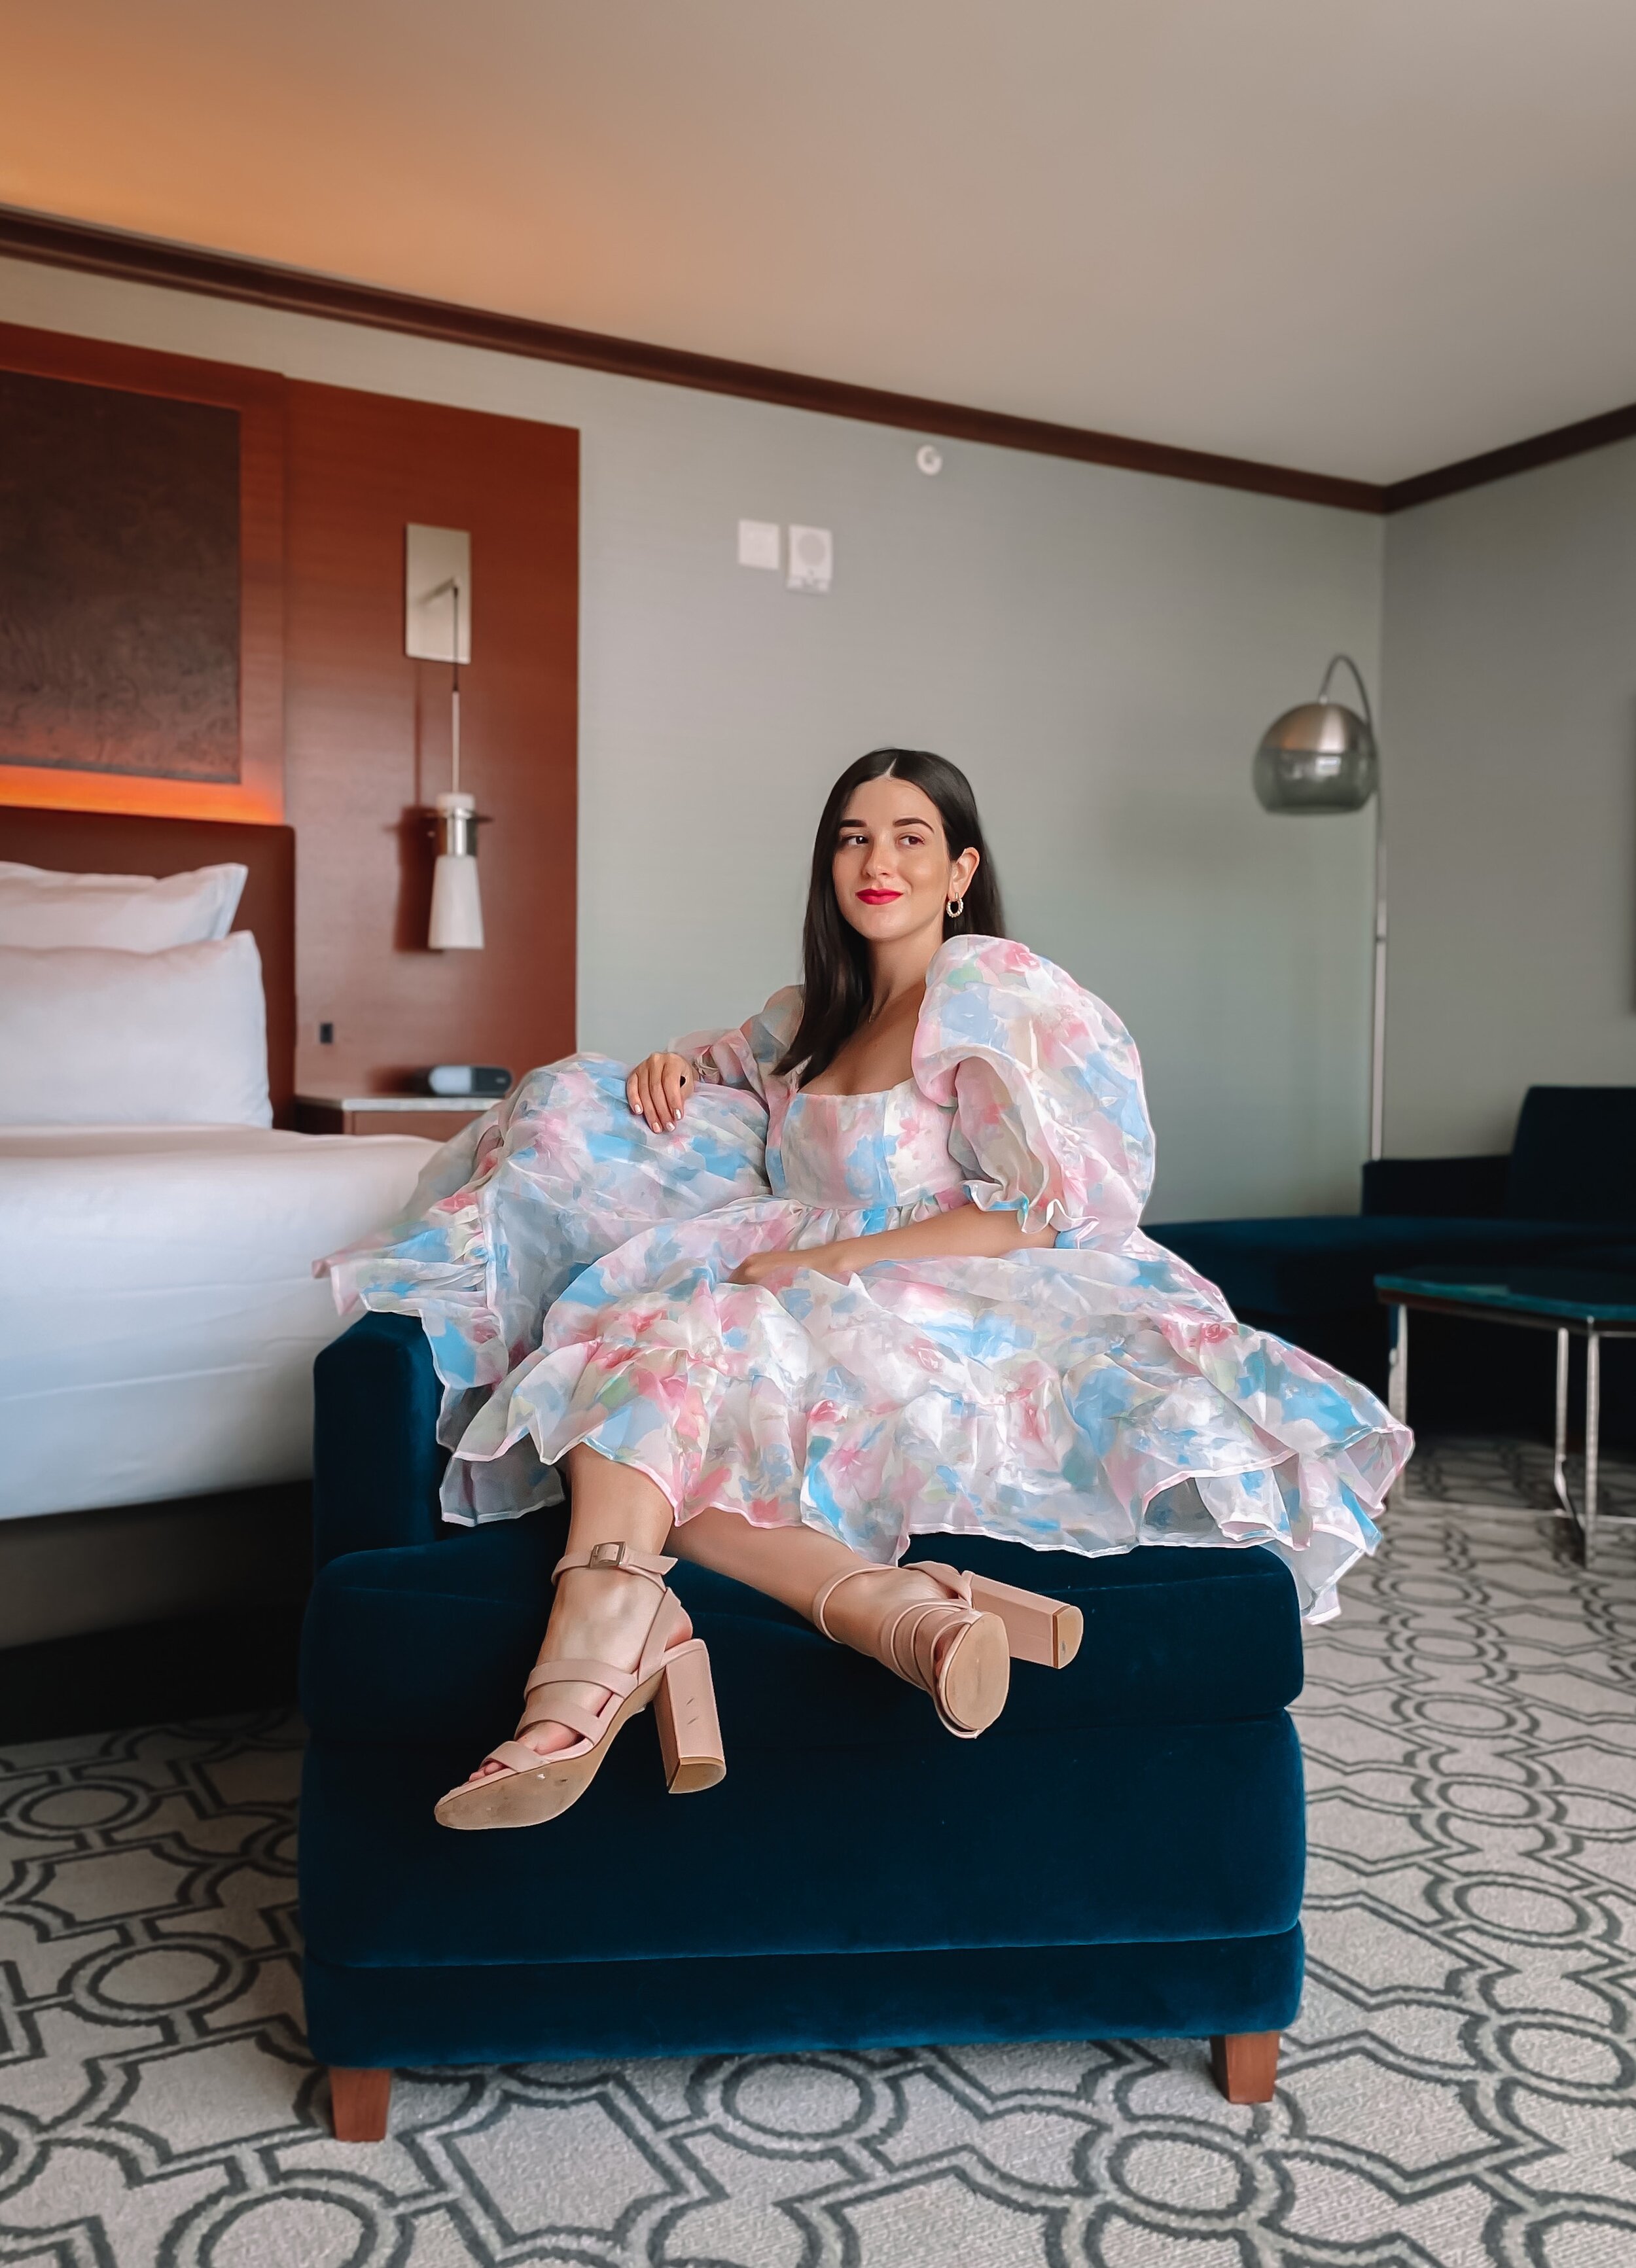 Princess Moment In Upstate New York Esther Santer NYC Street Style Blogger Hotel Puff Floral Dress Pink Heels Pastel Goodnight Macaroon Fun Poses Heels Women Girl Resort World Casino Suite Summer Styling What to Wear Fancy Trendy Shop  Pretty.JPG